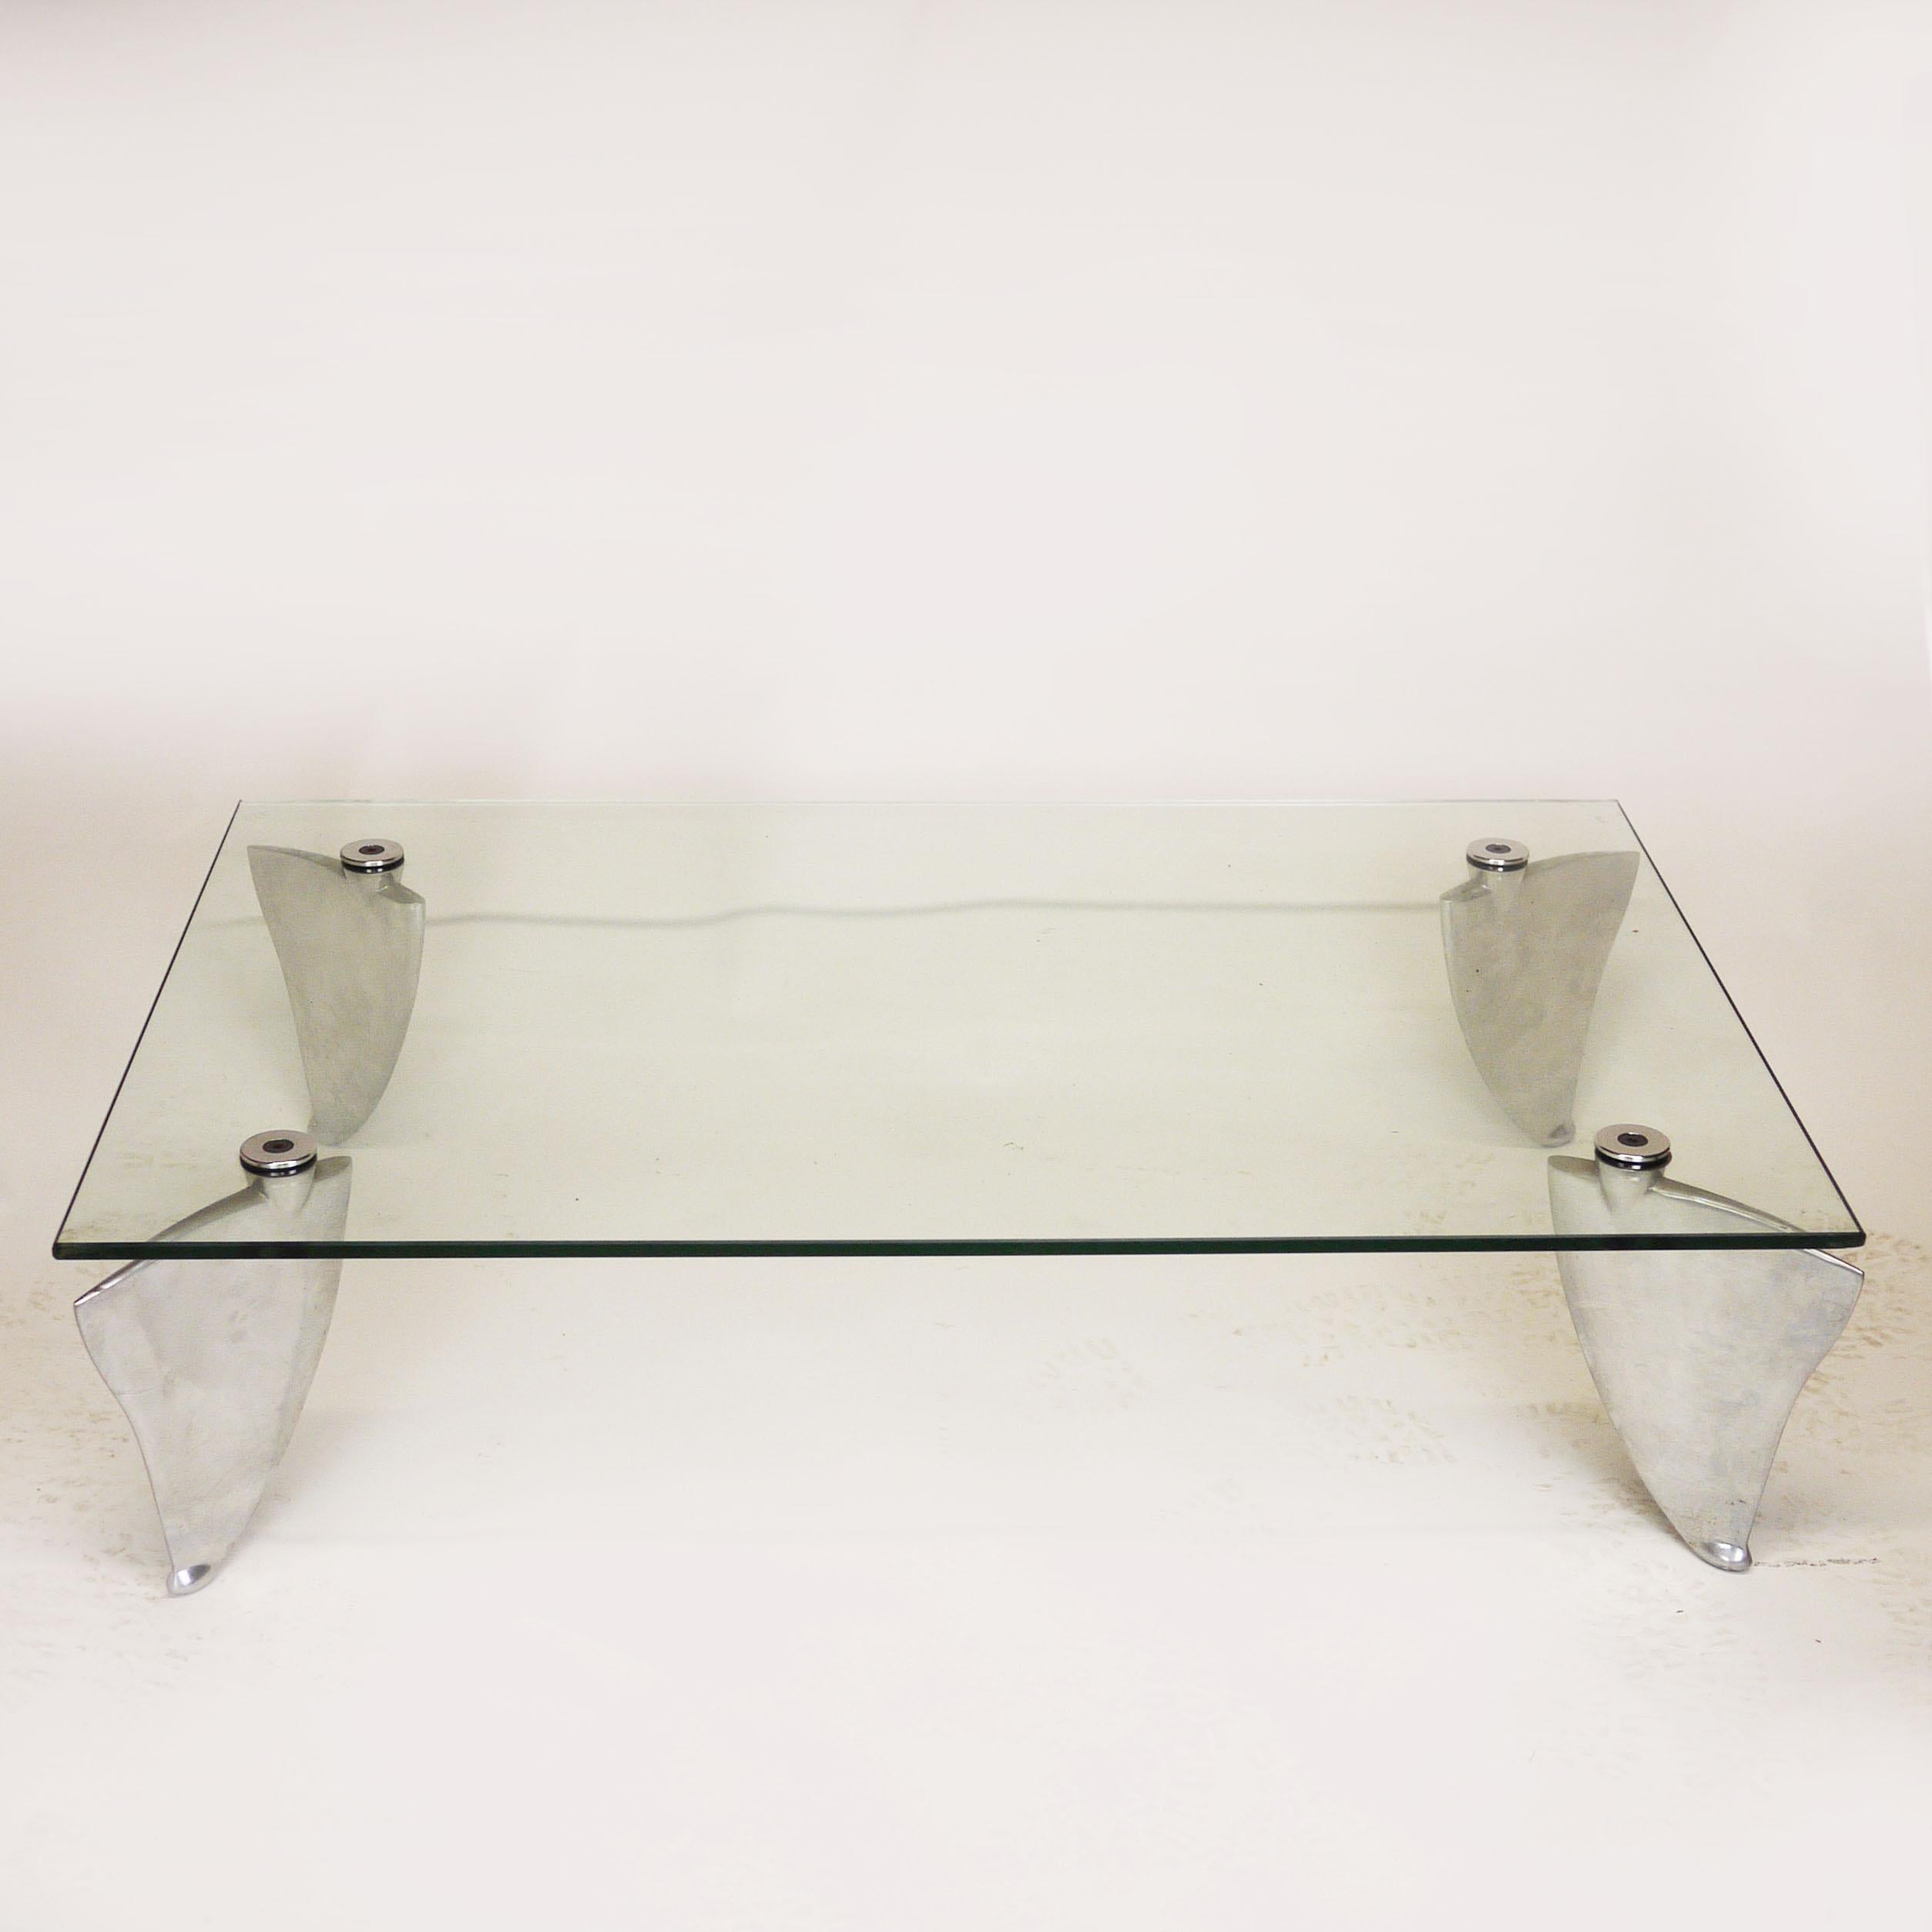 Vintage Glass and Aluminum 'Fipper' Coffee Table by Matthew Hilton for SCP, 1980 For Sale 5